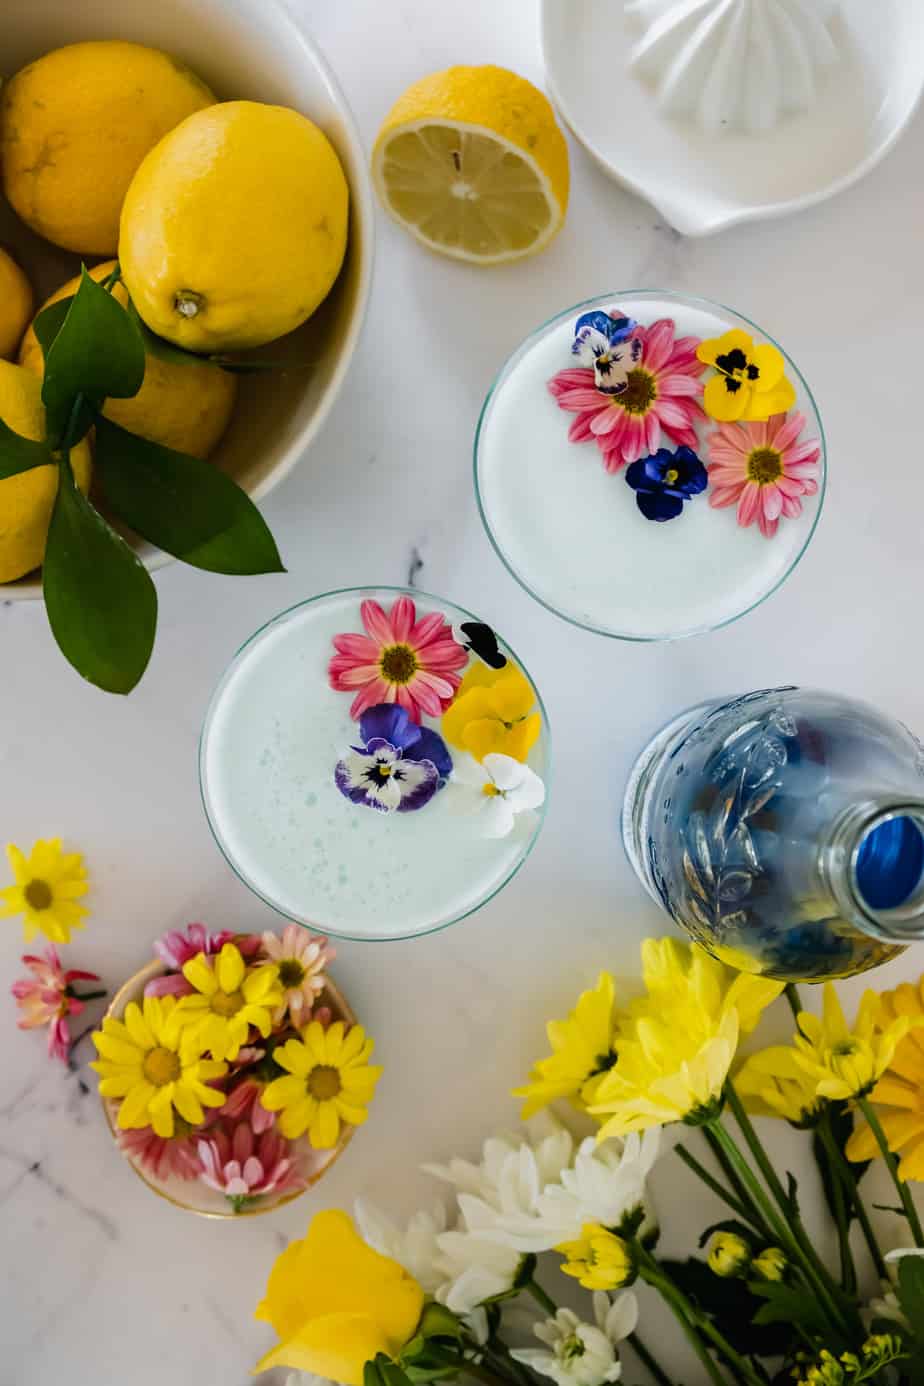 Blueberry gin sours in serving glasses topped with fresh flowers.